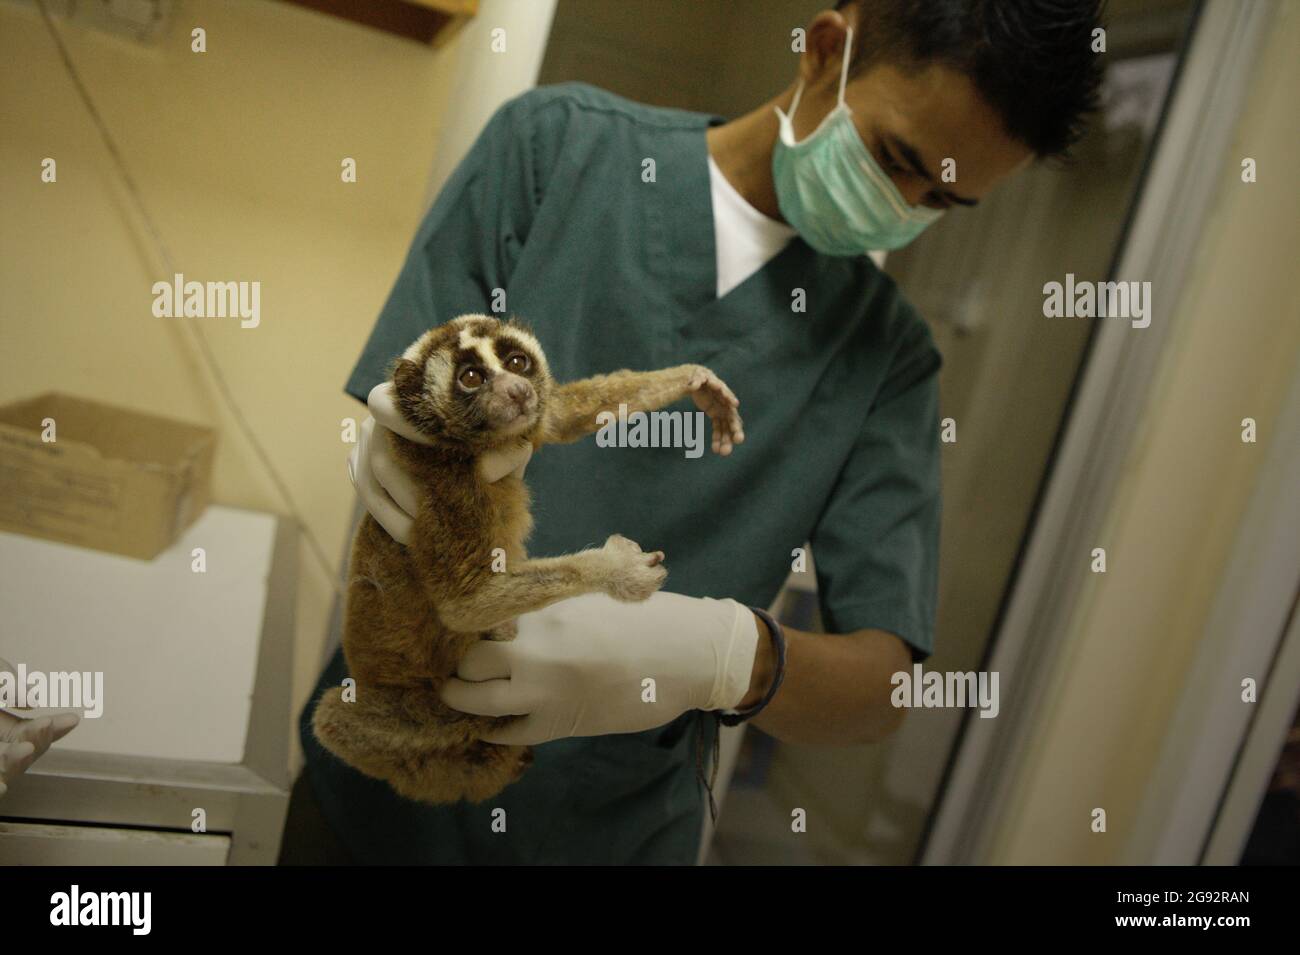 A team of veterinarians led by Sharmini Julita Paramasivam is preparing a slow loris for a medical treatment. Rescued from wildlife trade, this is one of the primates being rehabilitated at the facility operated by International Animal Rescue (IAR) in Ciapus, Bogor, West Java, Indonesia. The primates will be released into the wild once they are ready. Stock Photo